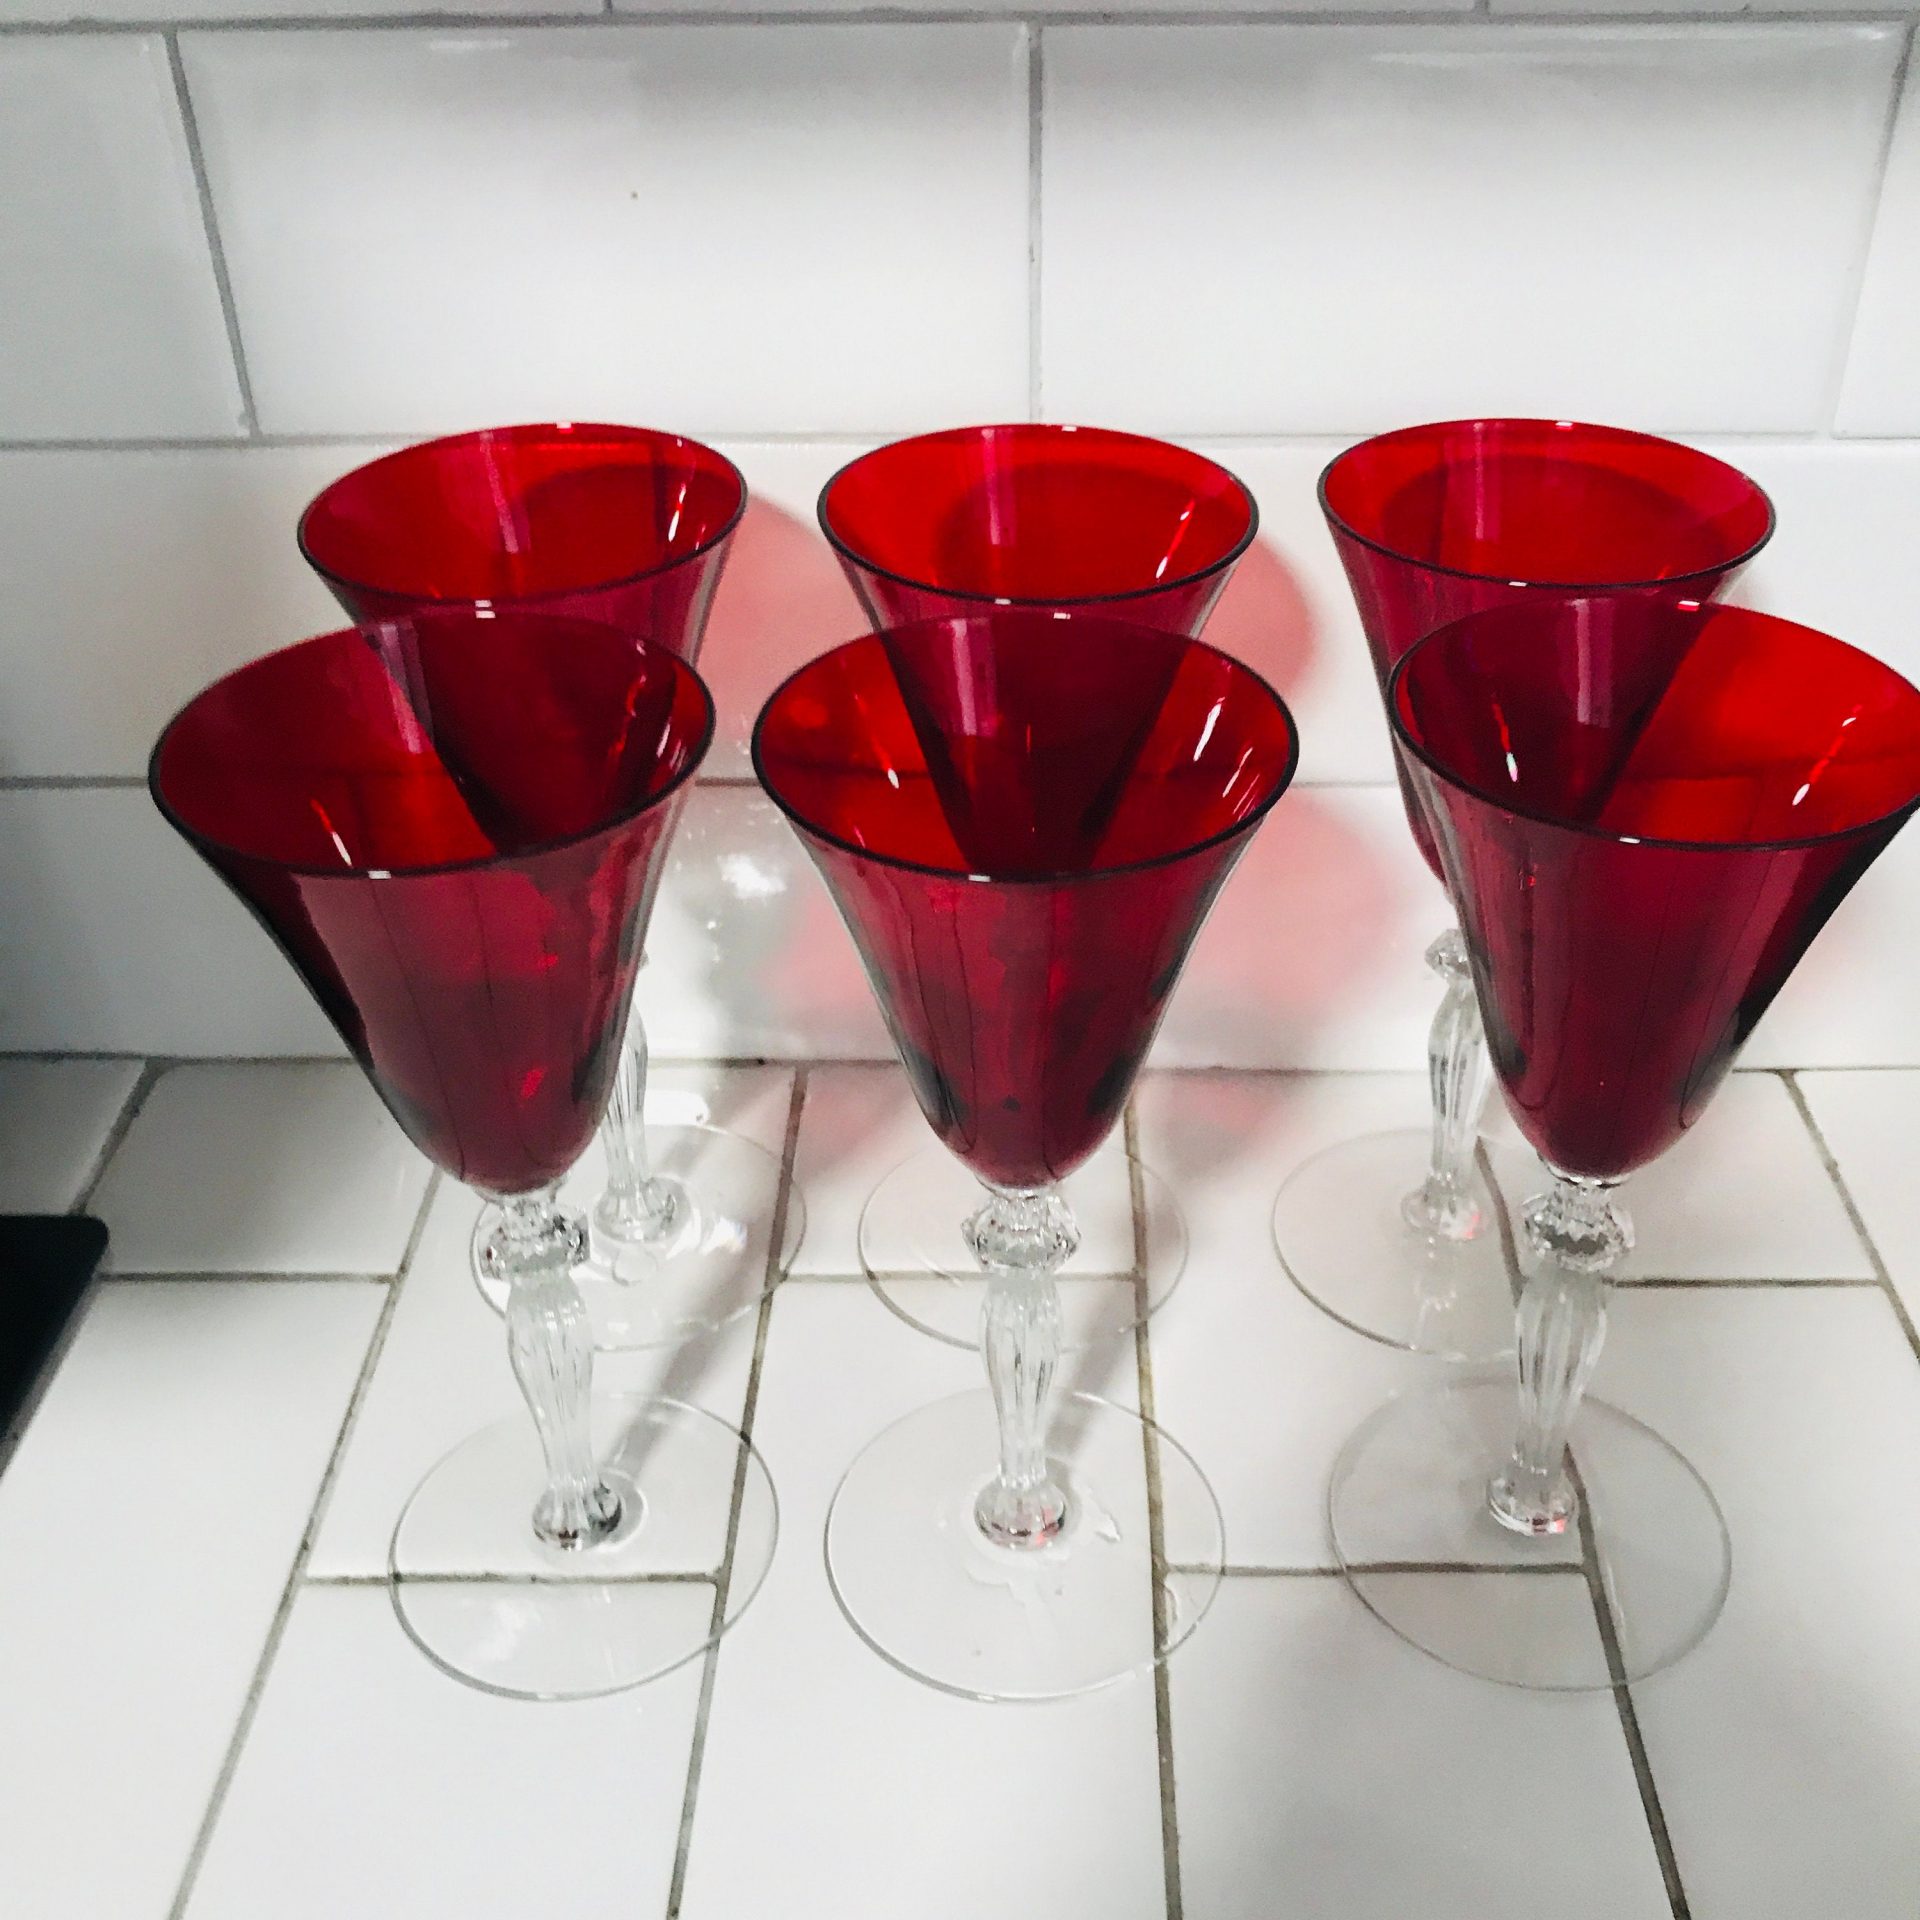 https://www.truevintageantiques.com/wp-content/uploads/2021/05/vintage-set-of-6-wine-glasses-red-with-clear-stems-fine-dining-elegant-dining-collectible-home-decor-display-glass-stemware-60992be43-scaled.jpg